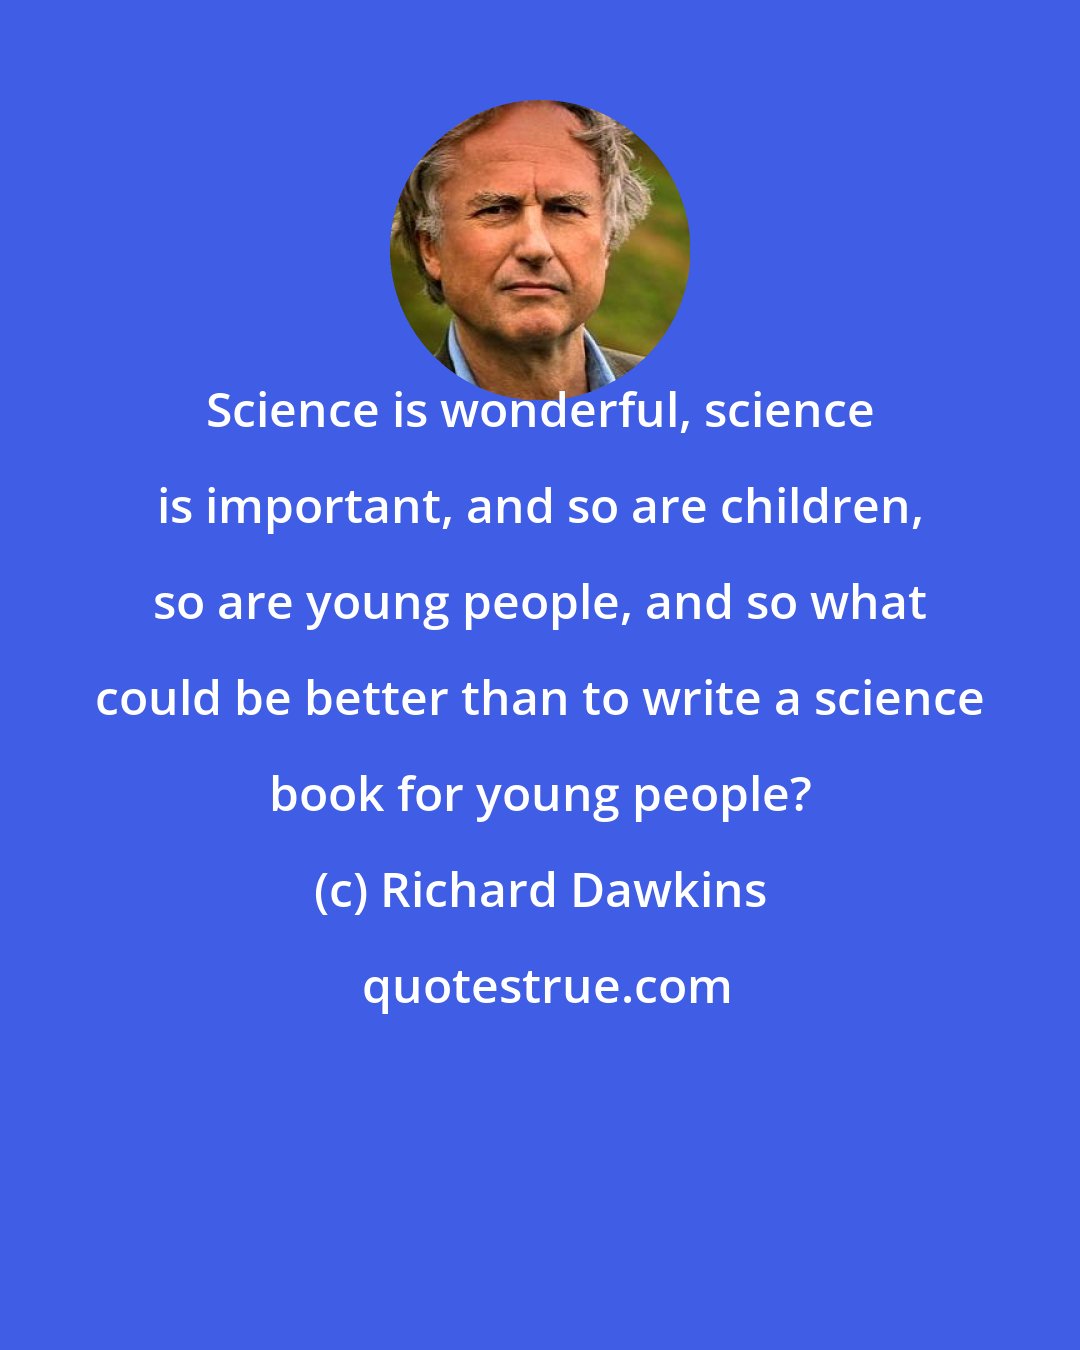 Richard Dawkins: Science is wonderful, science is important, and so are children, so are young people, and so what could be better than to write a science book for young people?